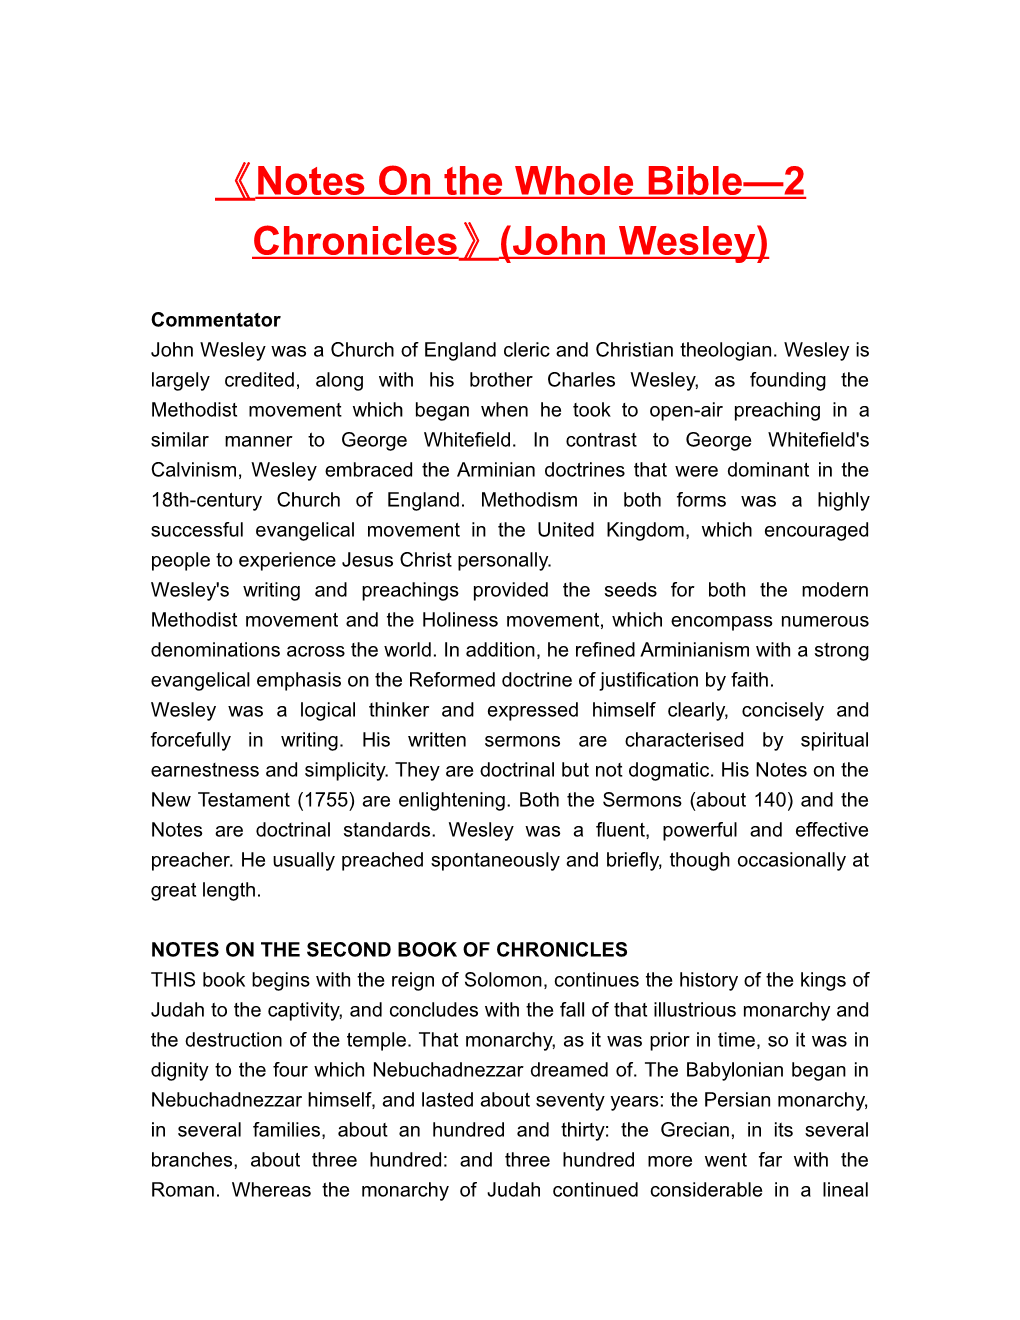 Notes on the Whole Bible 2 Chronicles (John Wesley)